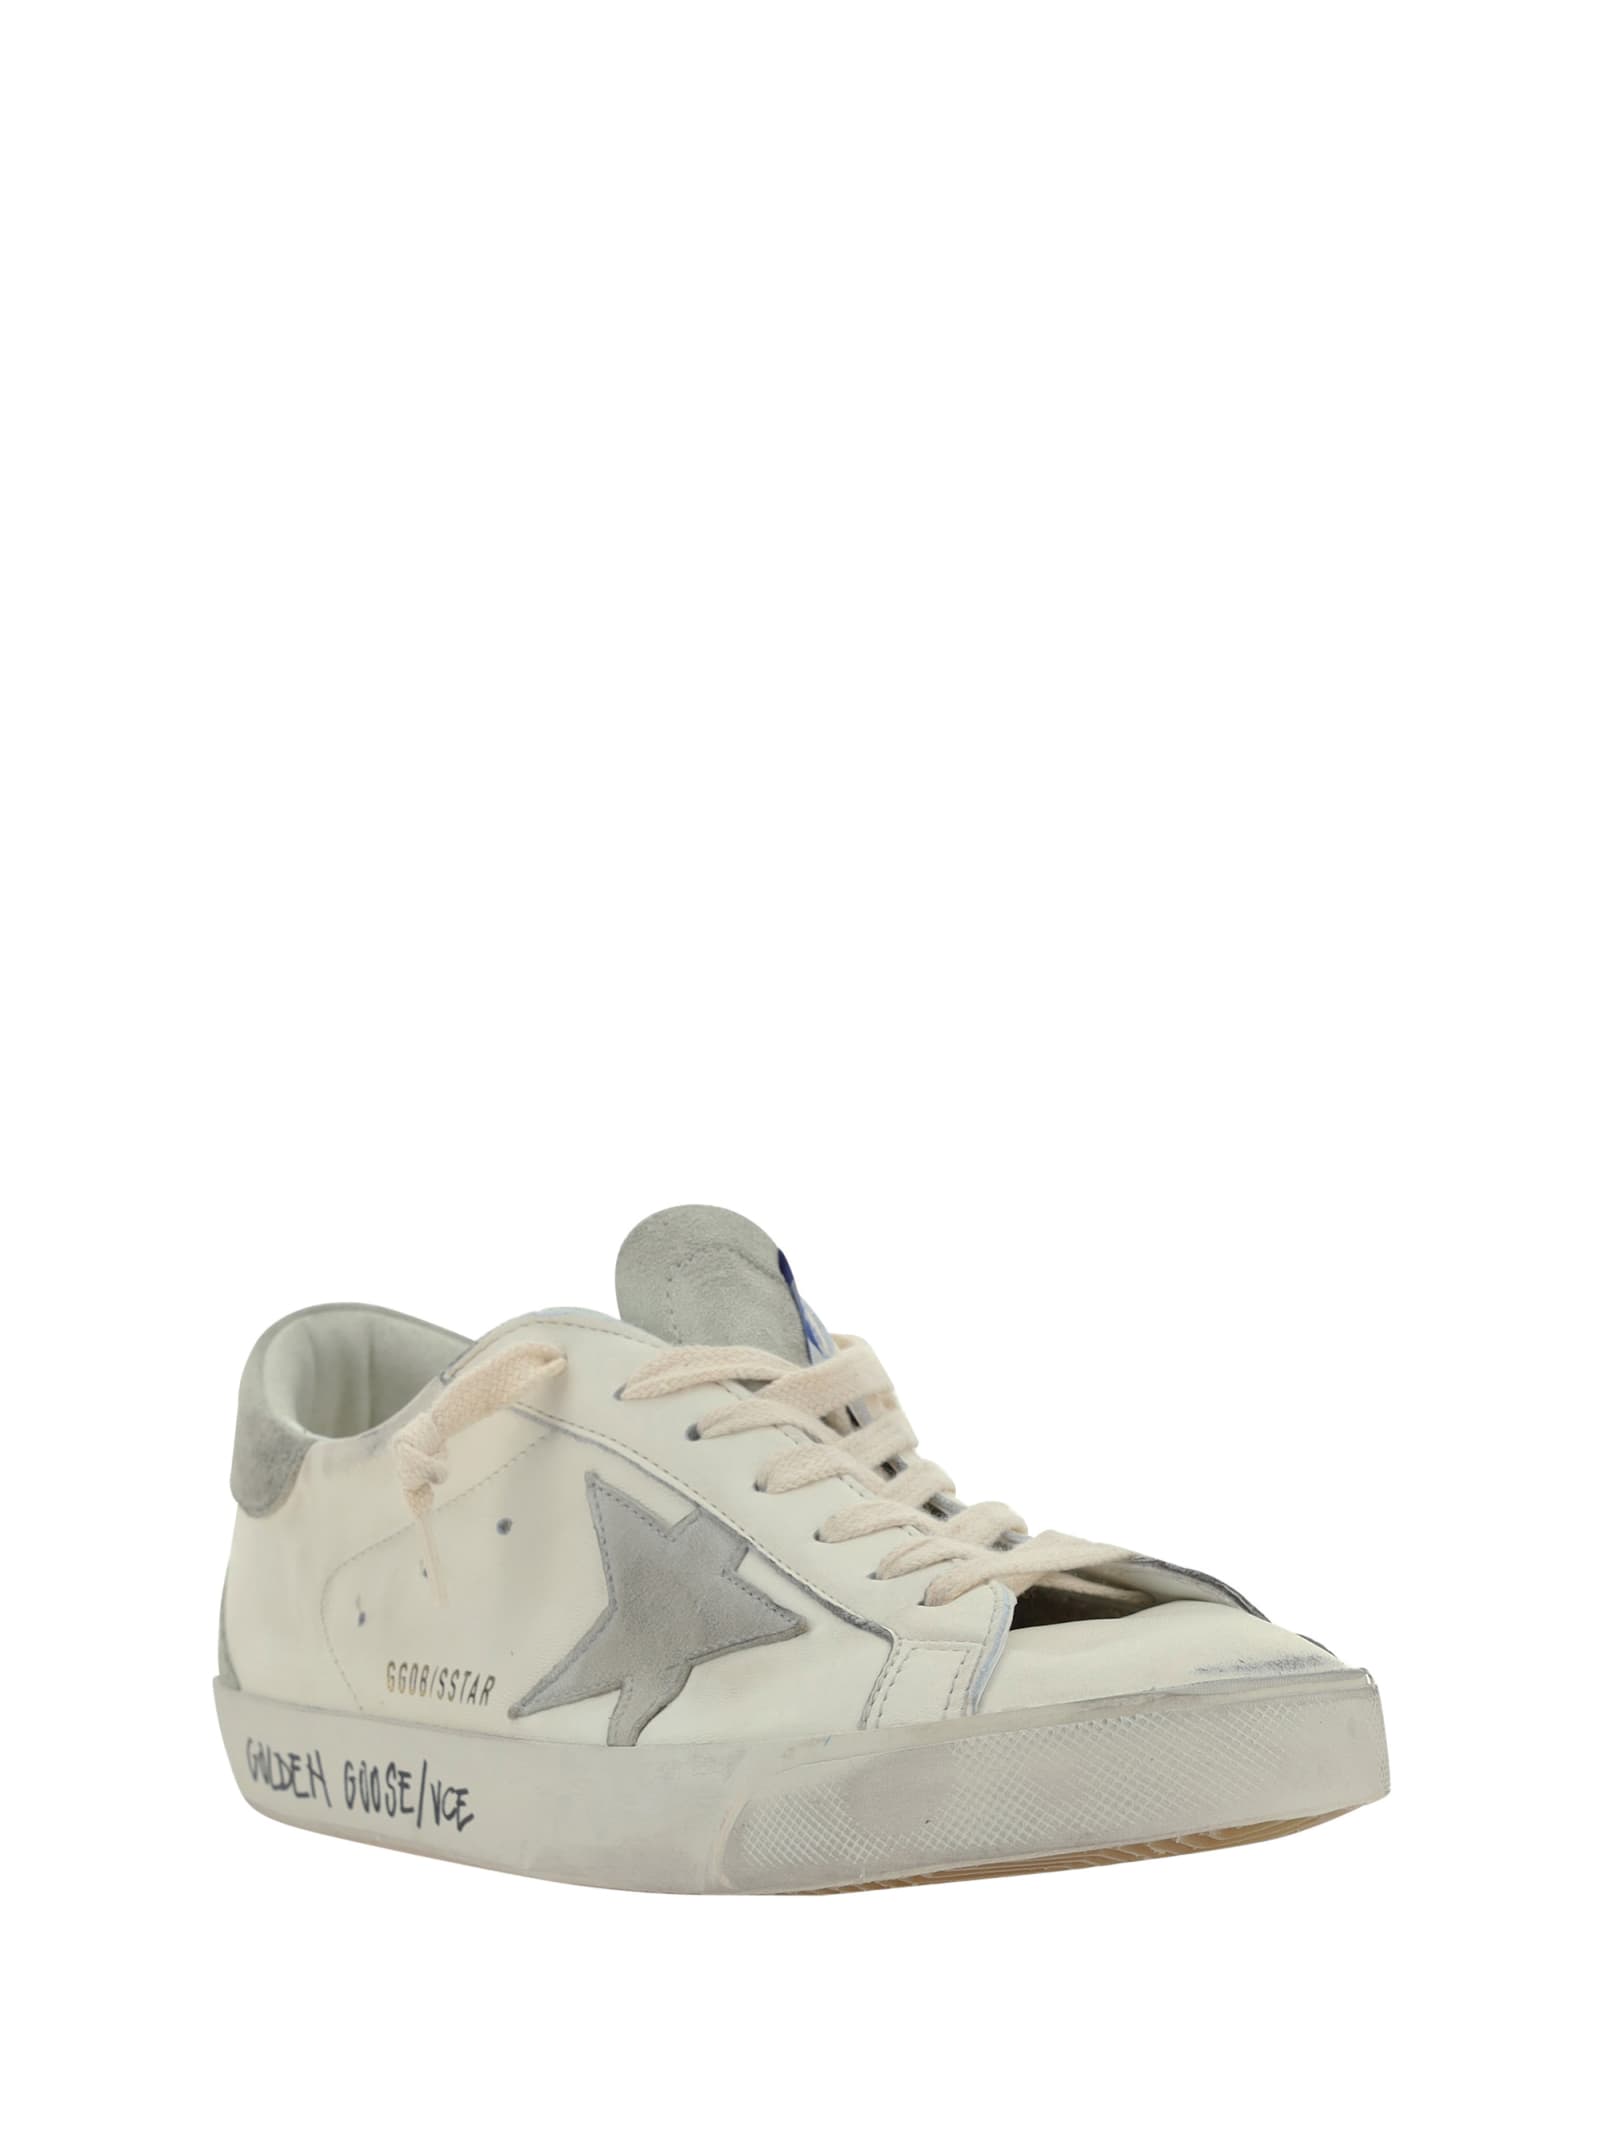 Shop Golden Goose Super Star Sneakers In White/ice/grey